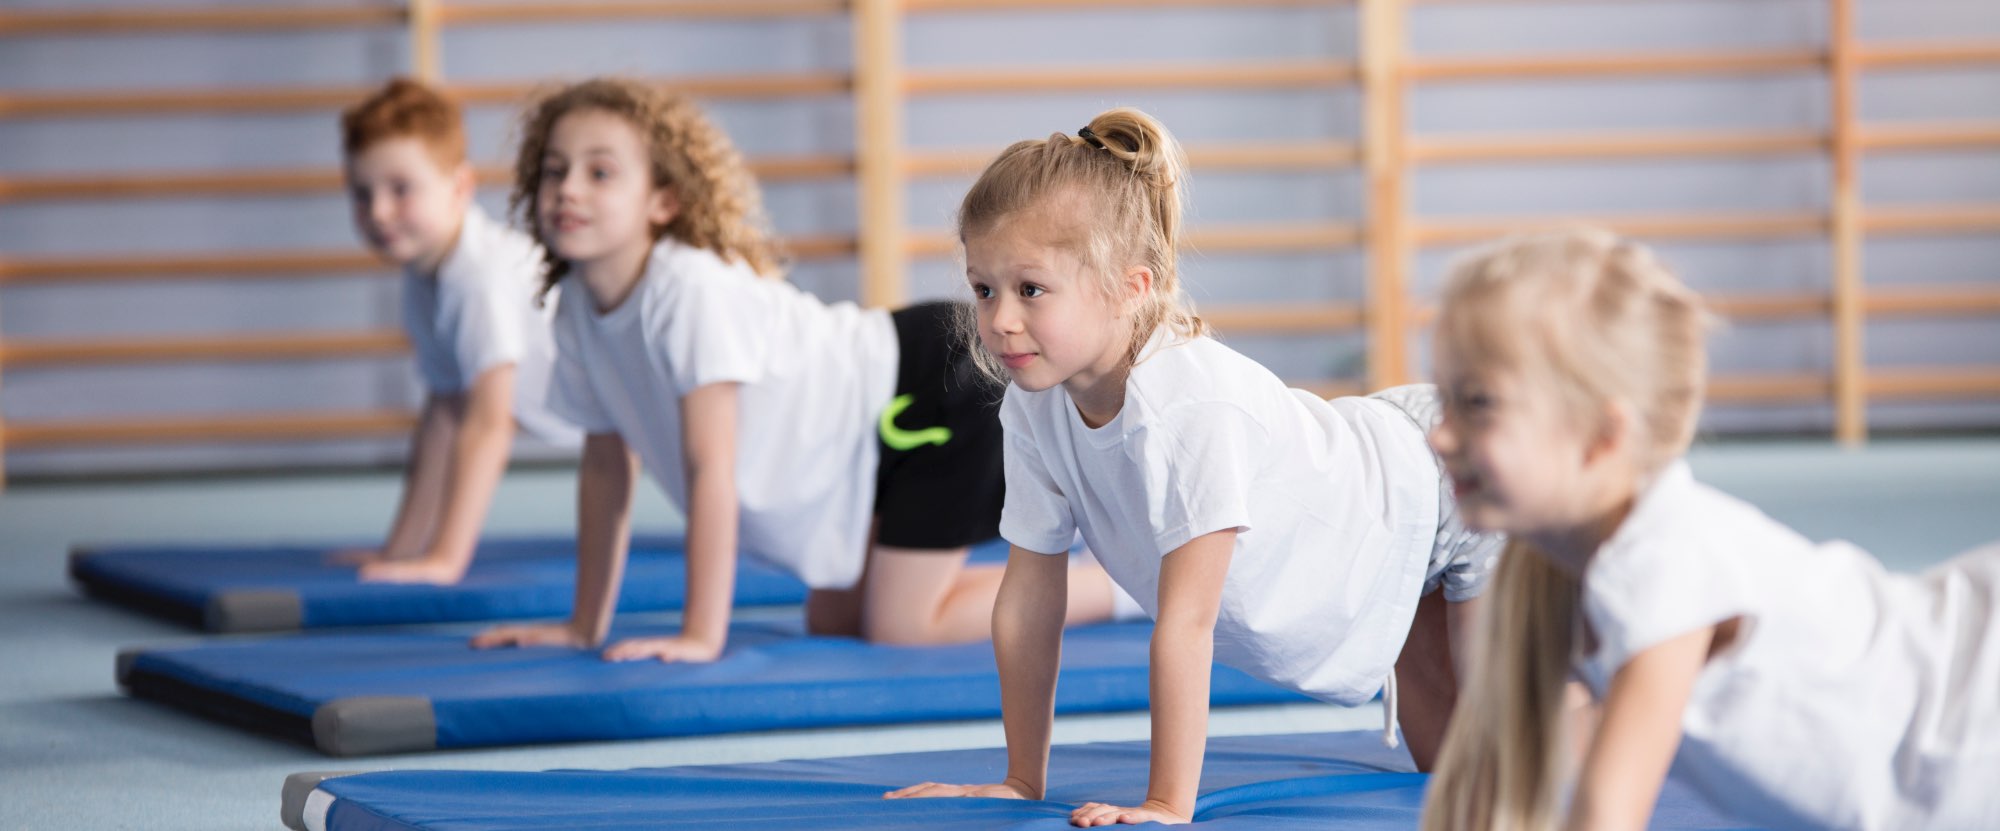 Children doing yoga in their PE lesson. They are wearing white t shirts and shorts, and are exercising on blue mats.